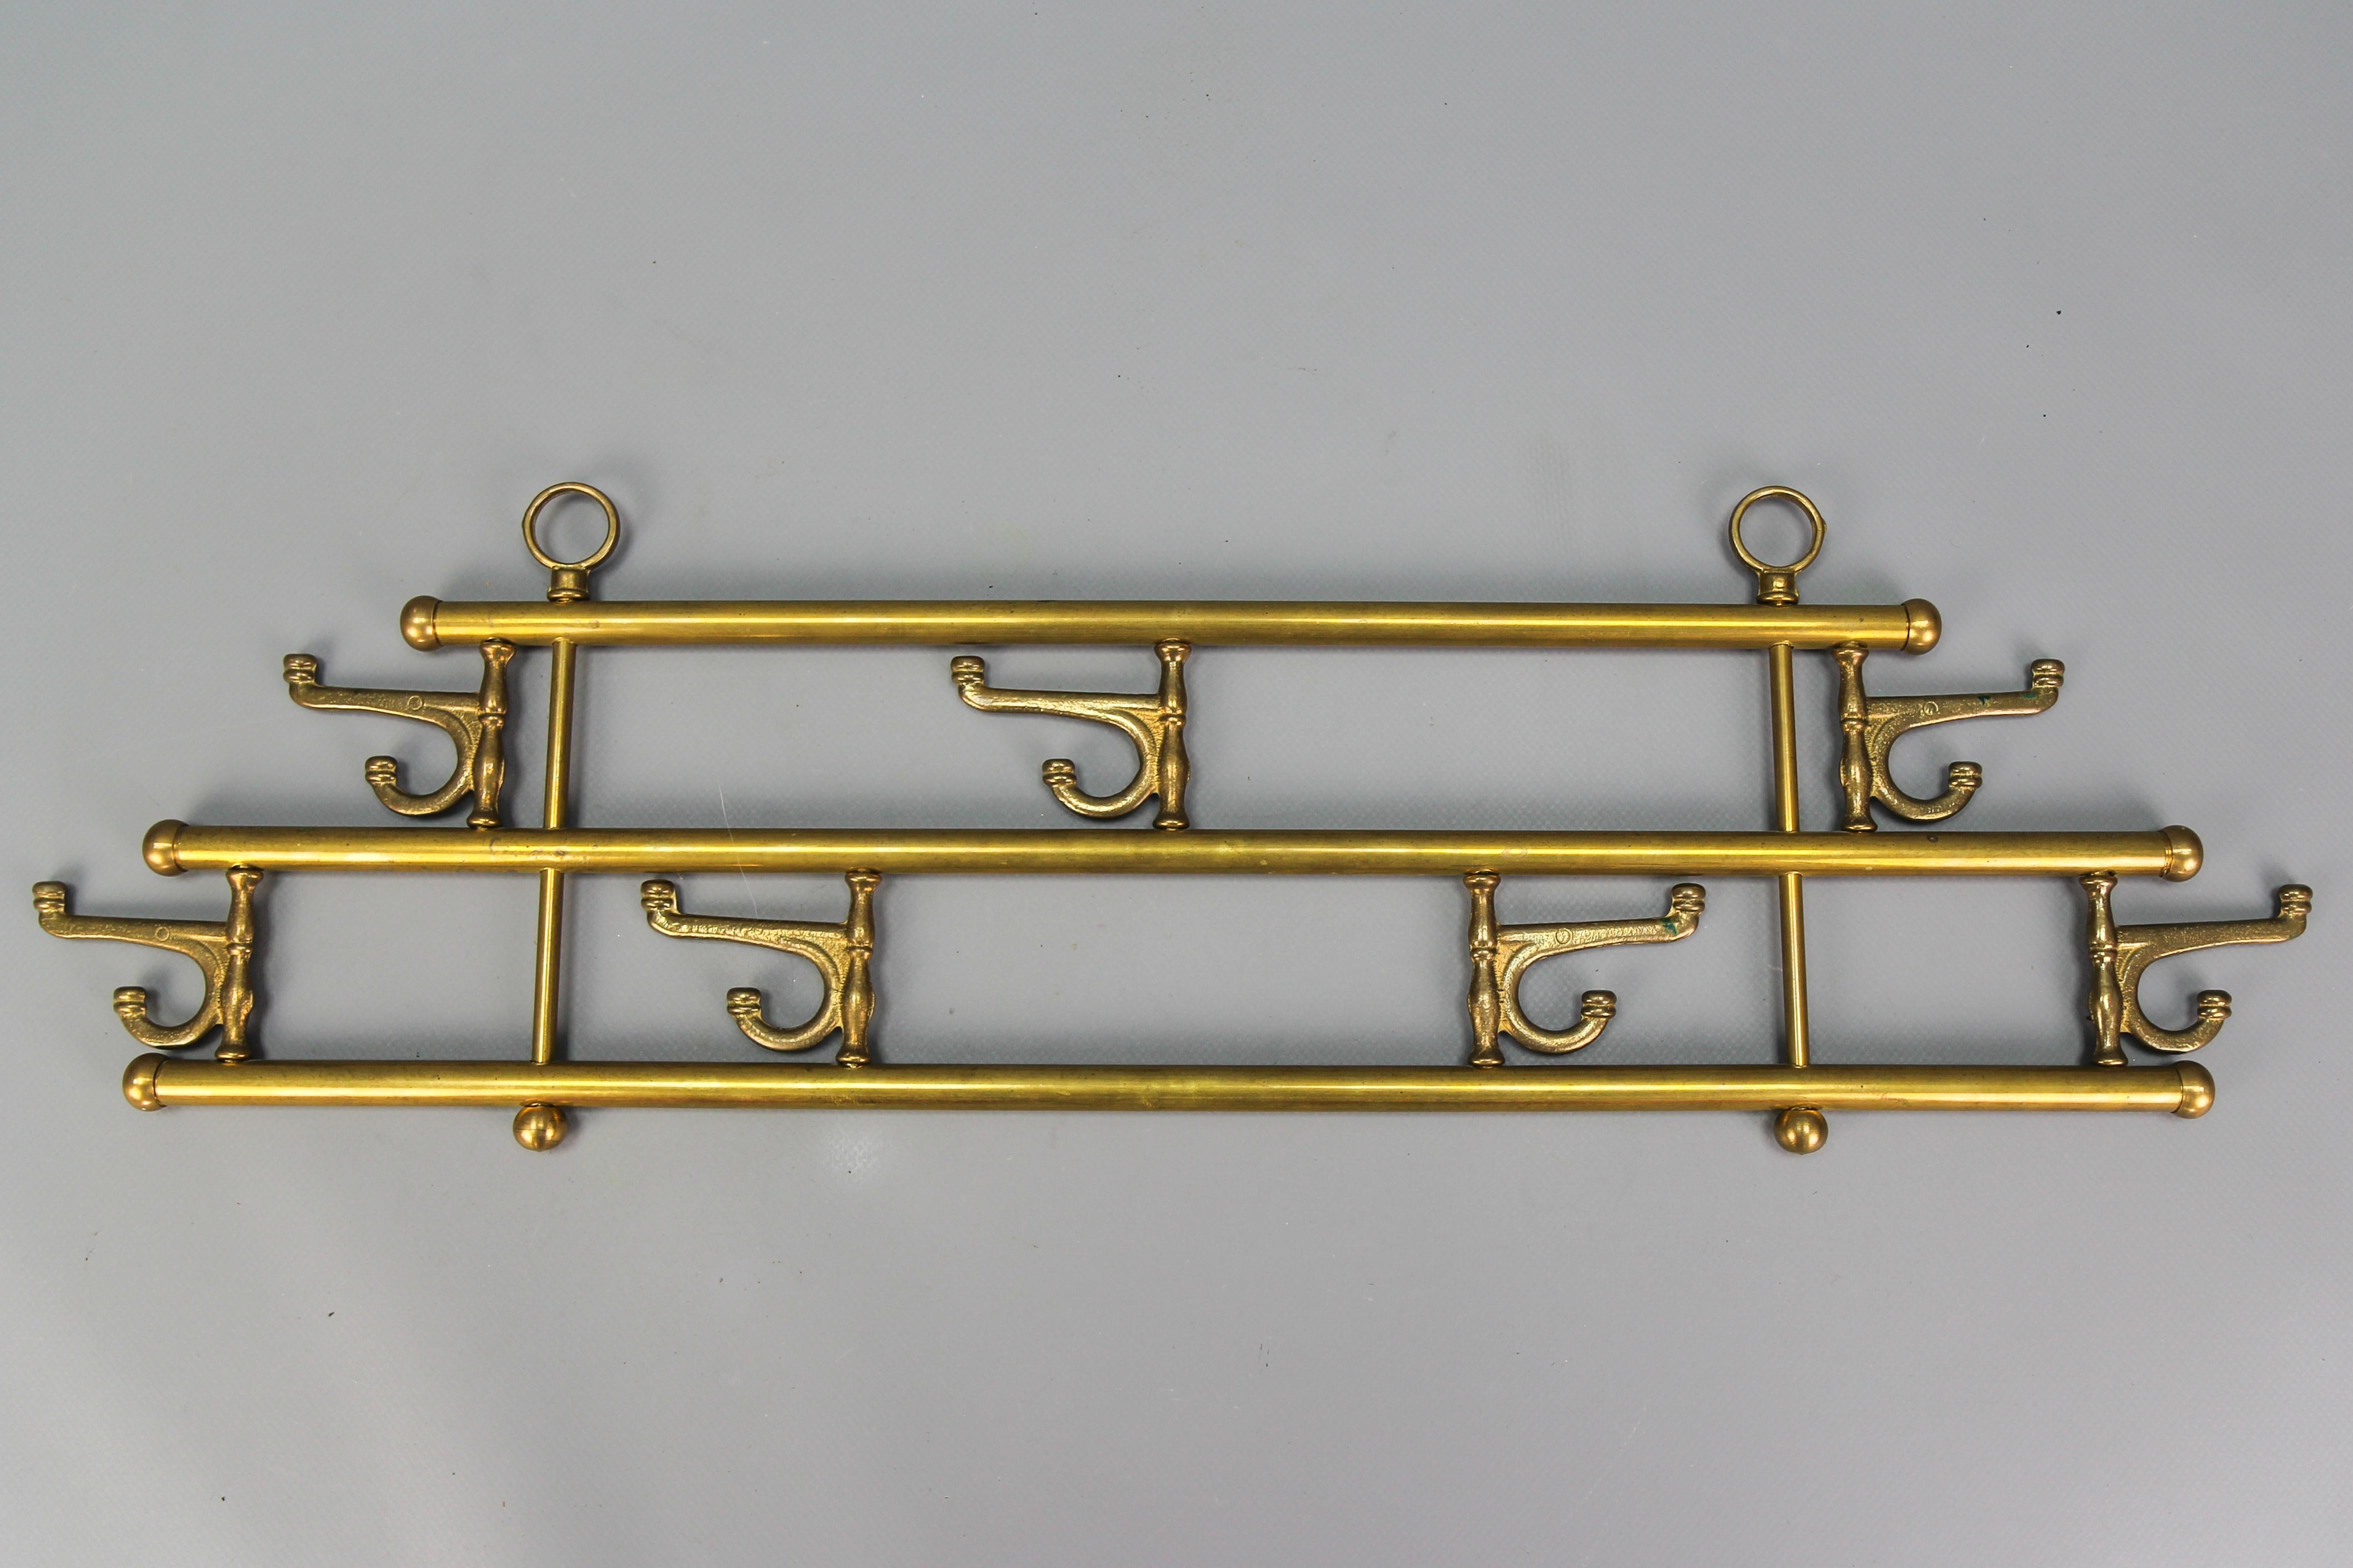 Vintage Mid-Century Modern brass coat rack with seven swiveling hooks, Austria, circa the 1960s.
Decorative towel, kitchen, or small coat brass rack with seven rotating modernist-style hooks that can be swiveled.
It is attached with 2 rings that can